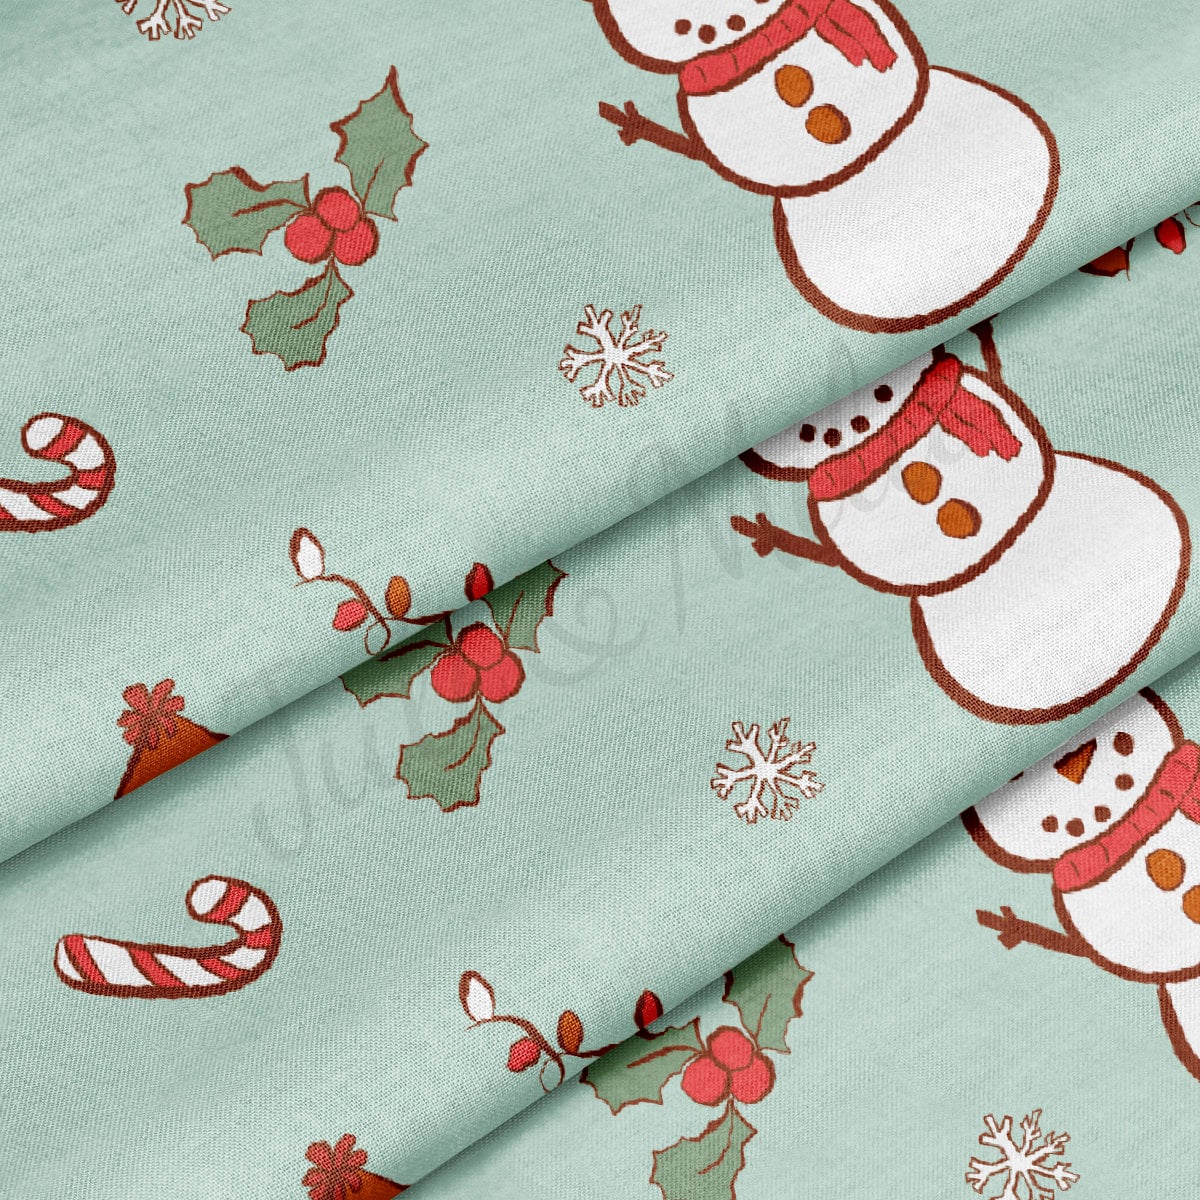 100% Cotton Fabric By the Yard Printed in USA Cotton Sateen -  Cotton CNT2065 Christmas